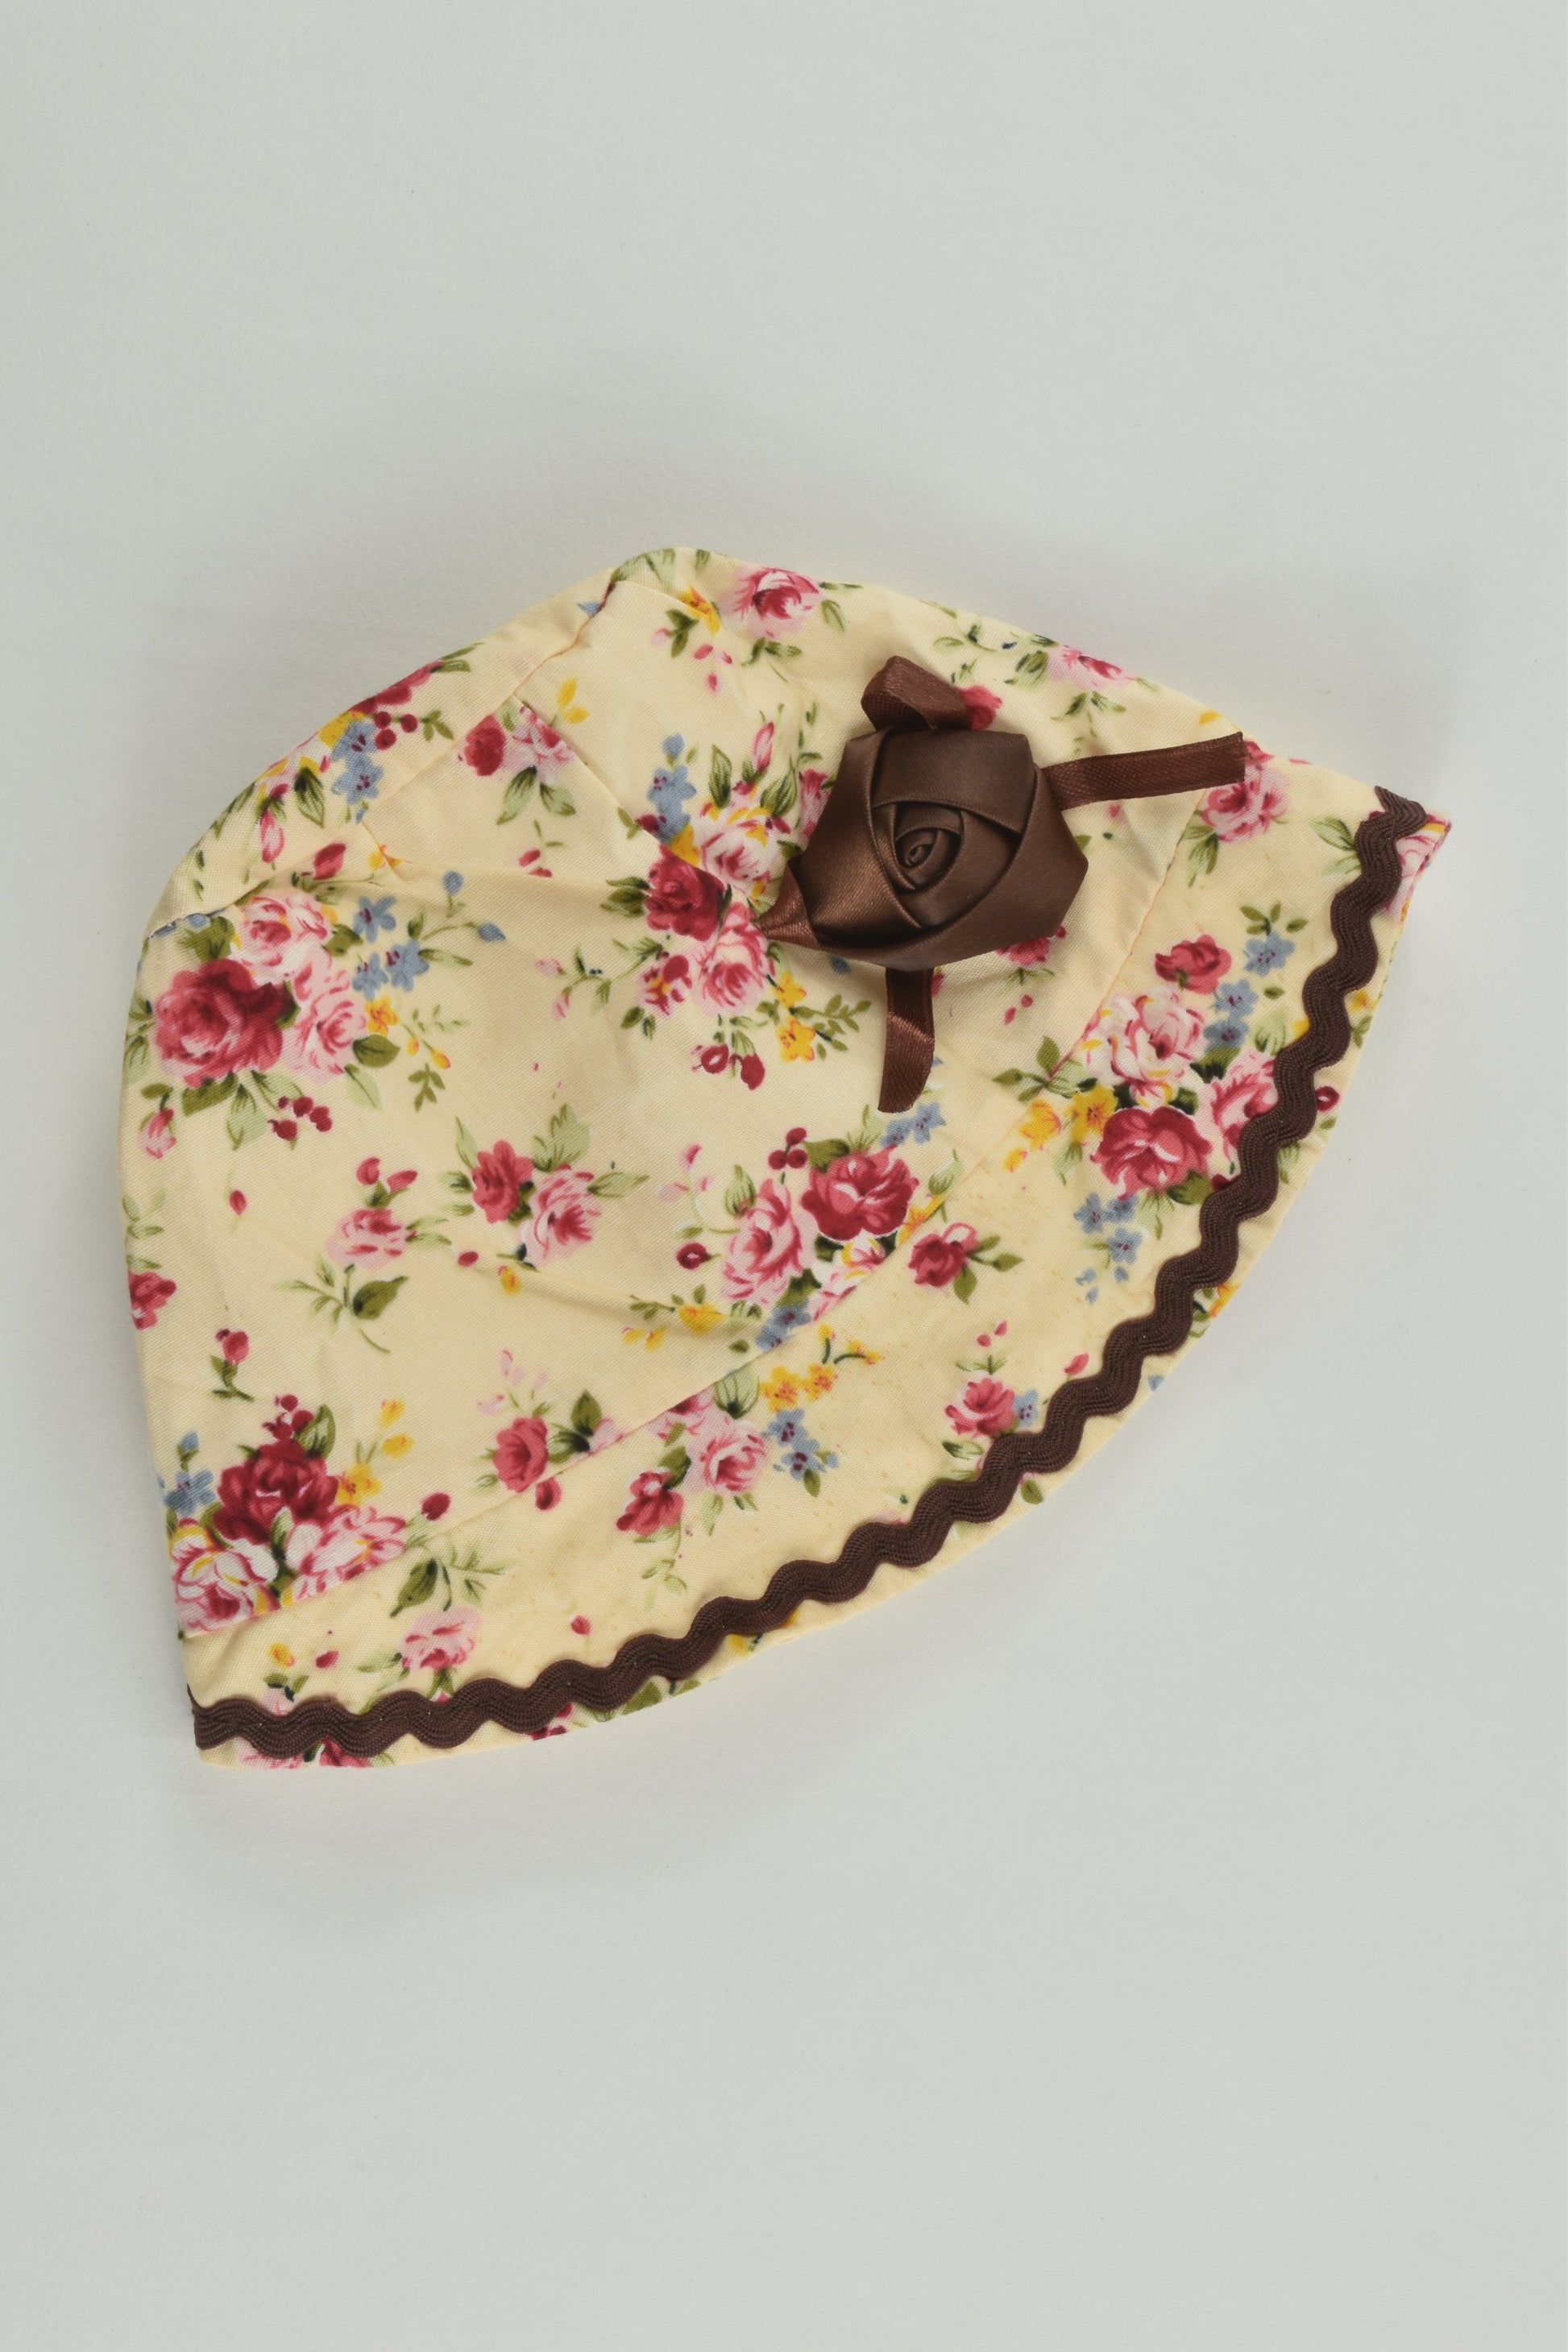 Handmade (?) Size approx 0-6 months Floral Hat